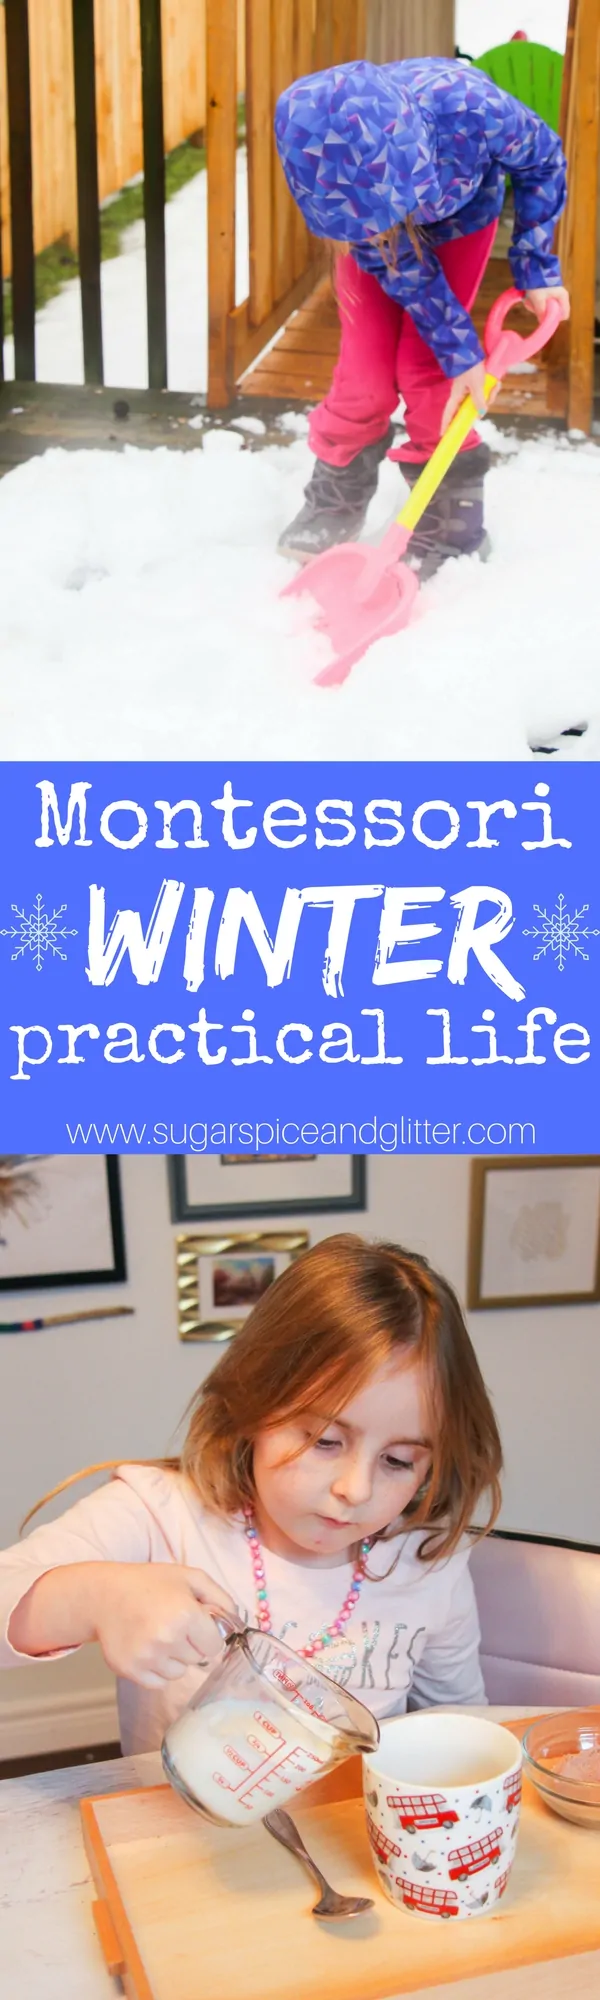 Montessori Winter Practical Life activities that require little to no preparation. From heavy work snow shovelling (and it's benefits) to a hot chocolate tray and formal lesson, these activities will keep kids happy and learning in the winter!